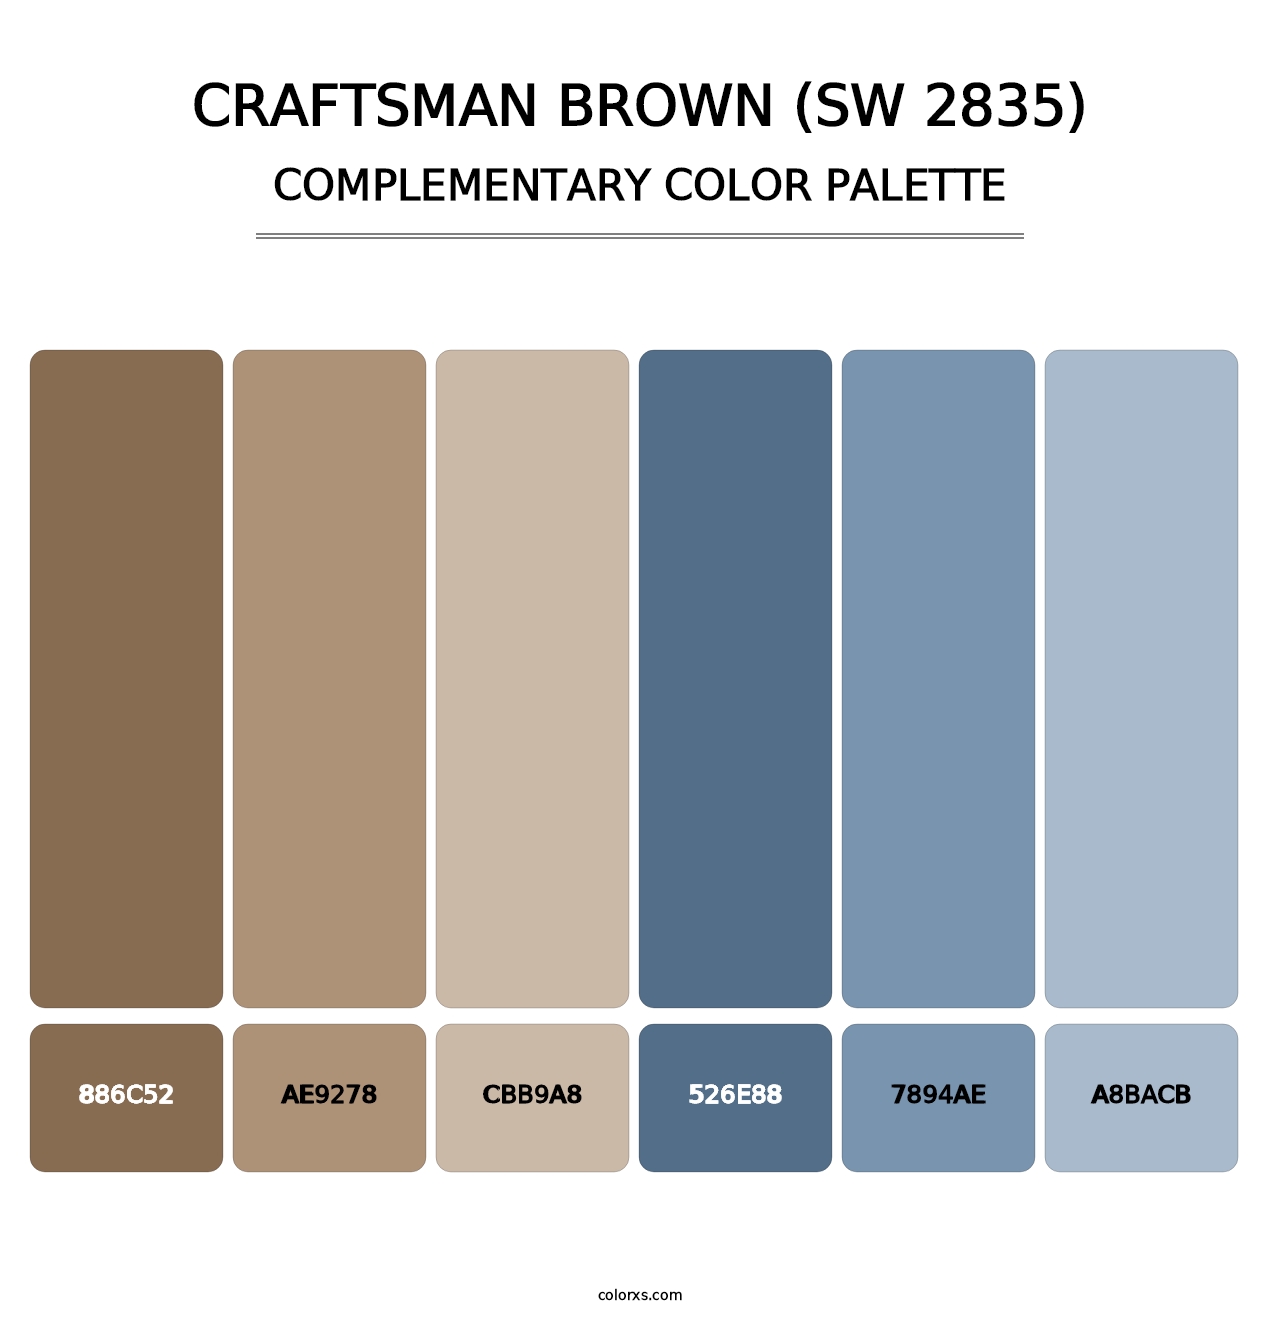 Craftsman Brown (SW 2835) - Complementary Color Palette